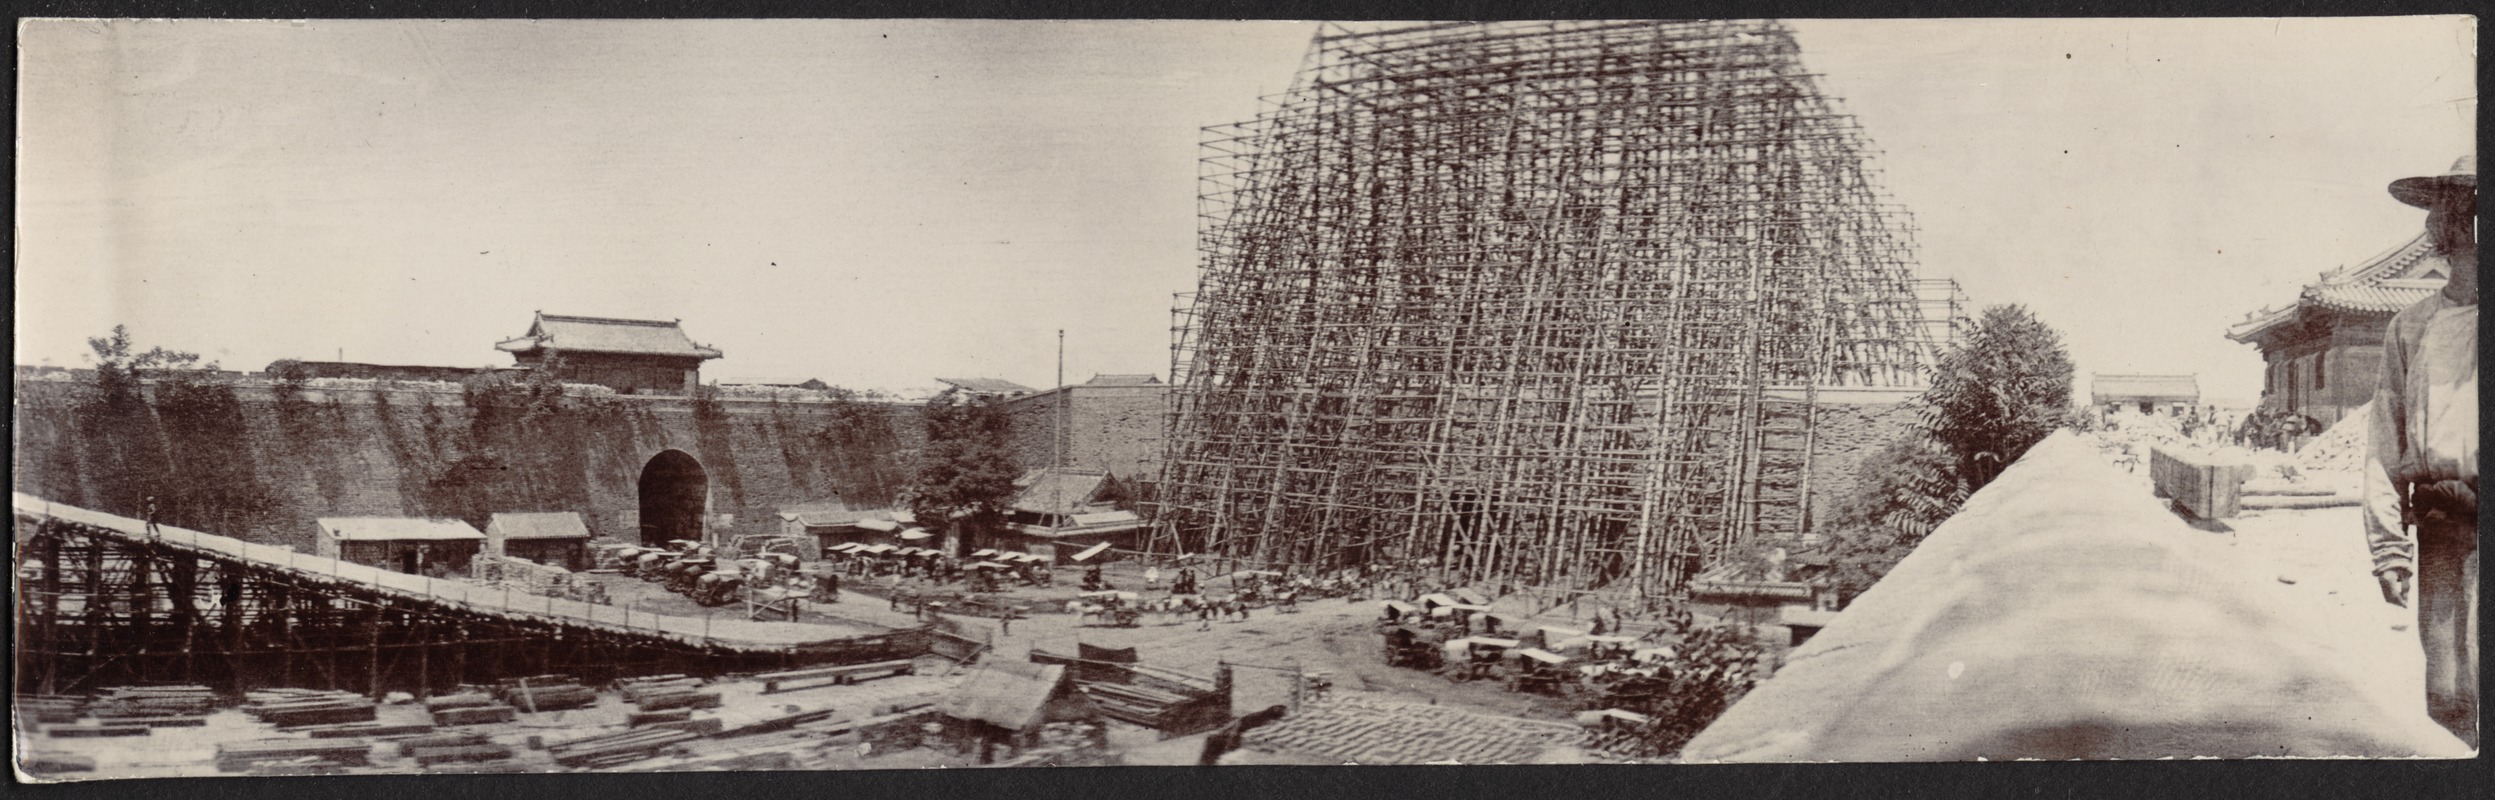 Construction of Foreign Legation quarter; scaffolding at main gate